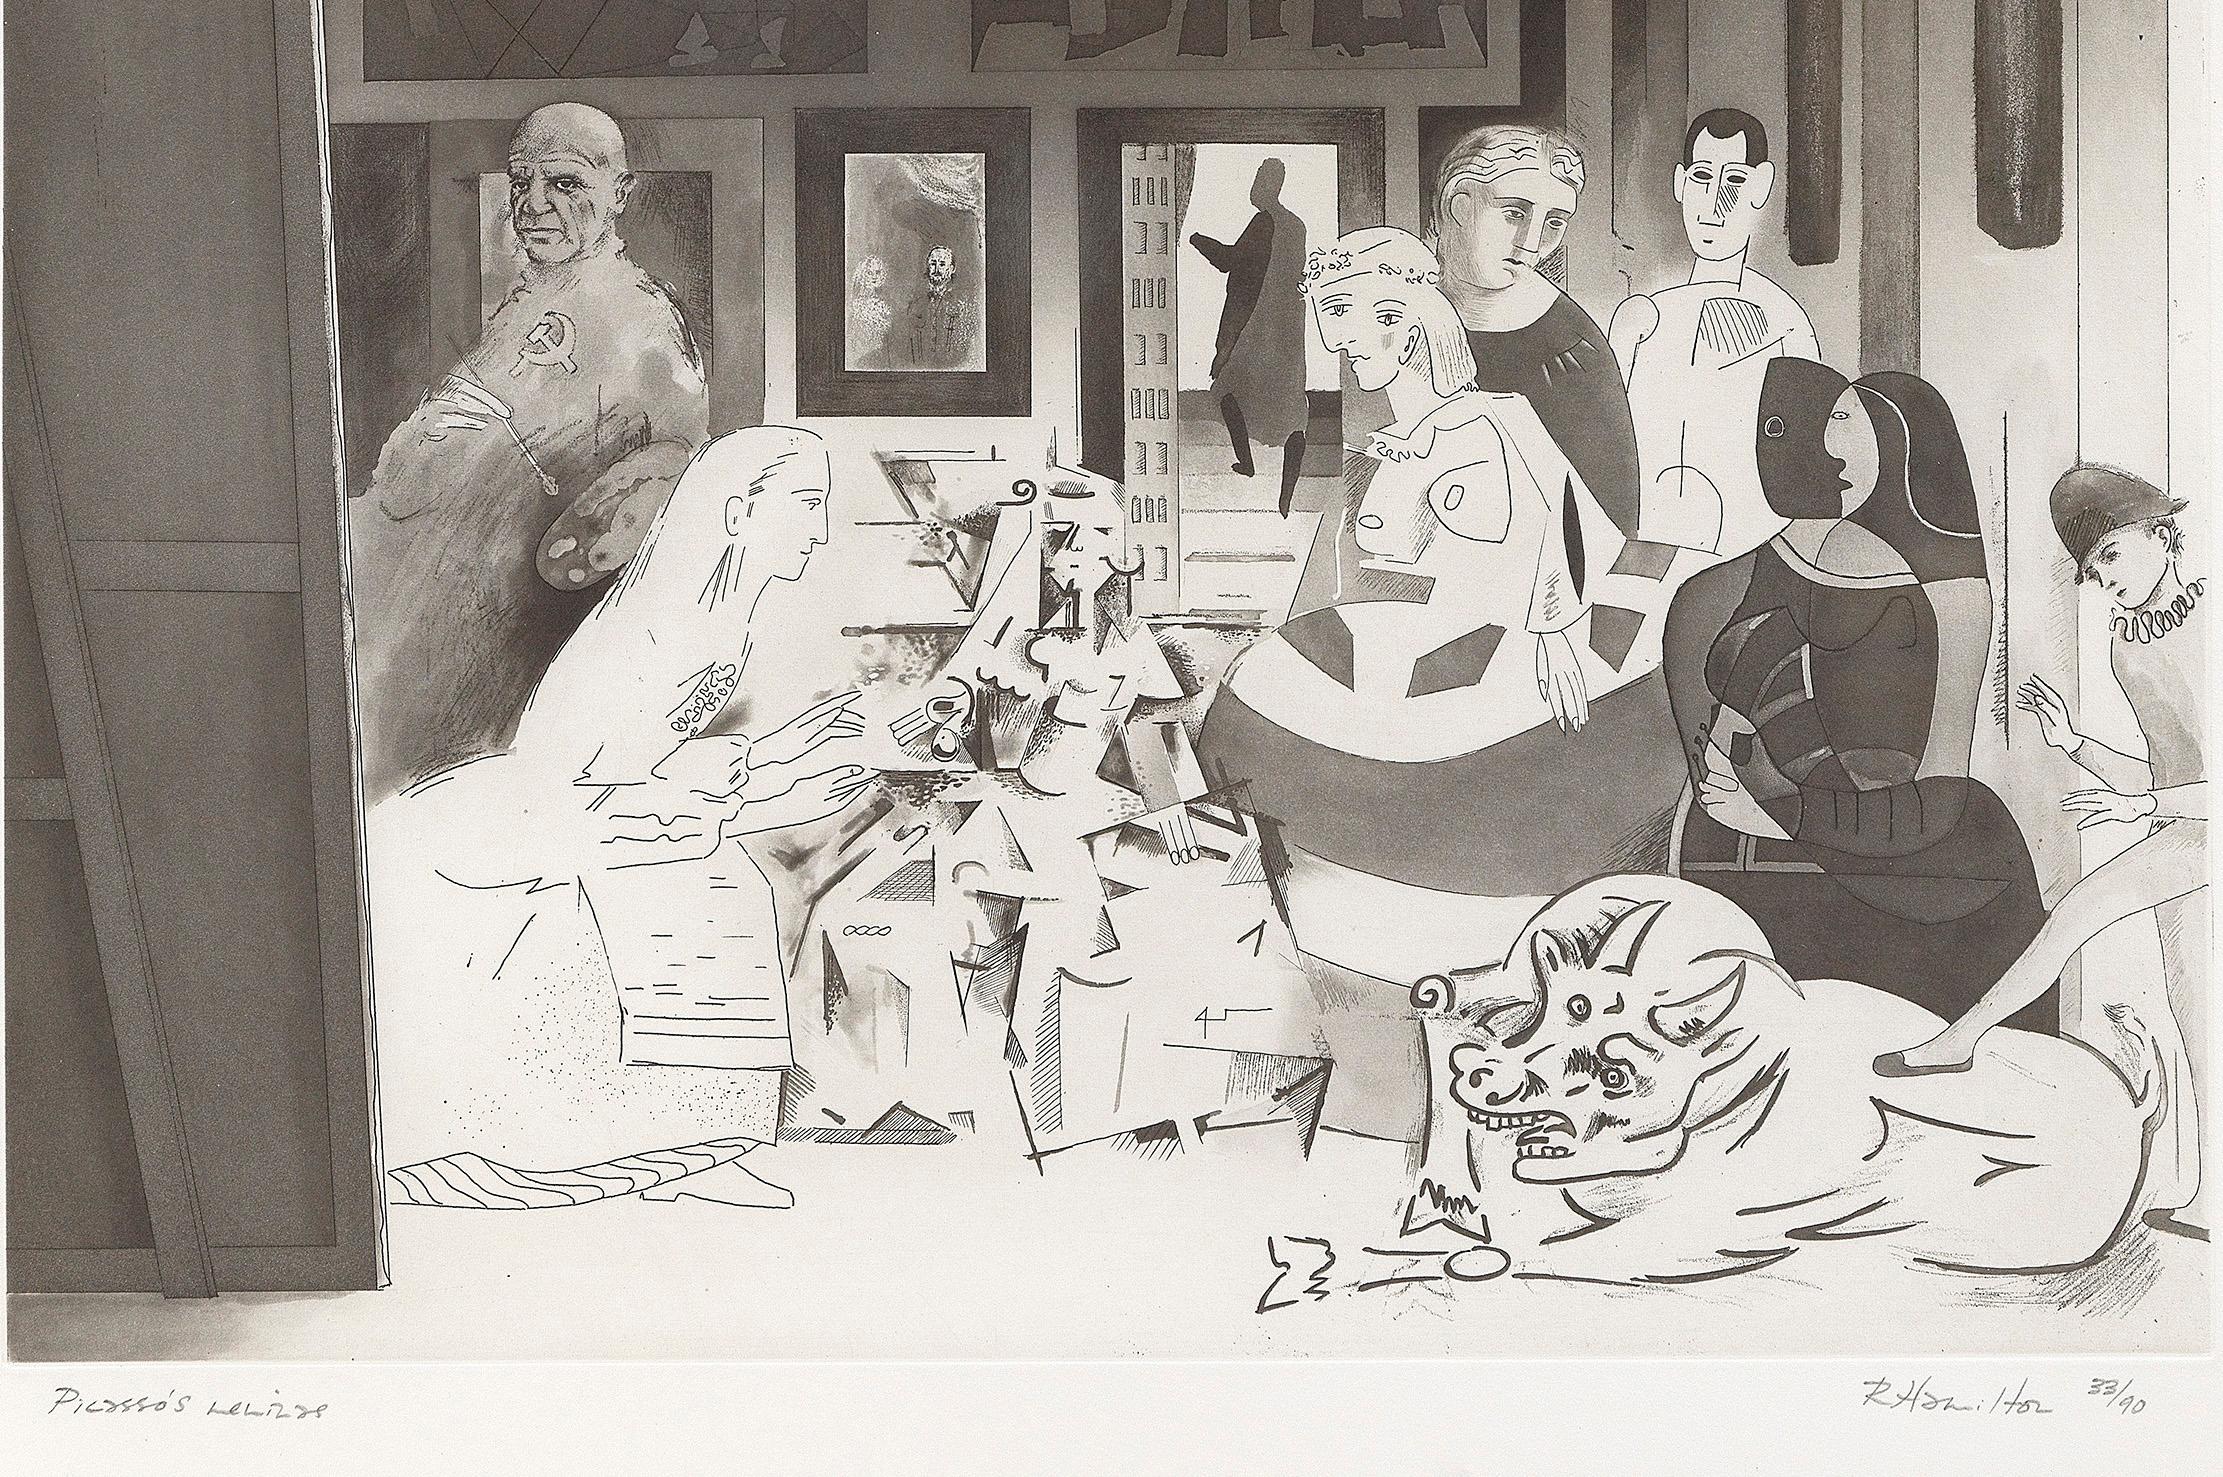 Etching with aquatint, roulette, and drypoint, 1973. 
Signed in pencil and numbered from the edition of 120. 
From: Homage to Picasso. 
Printed on Rives paper by Aldo Crommelynck, Paris. 
Co-published by Propyläen-Verlag, Berlin and Pantheon Press,